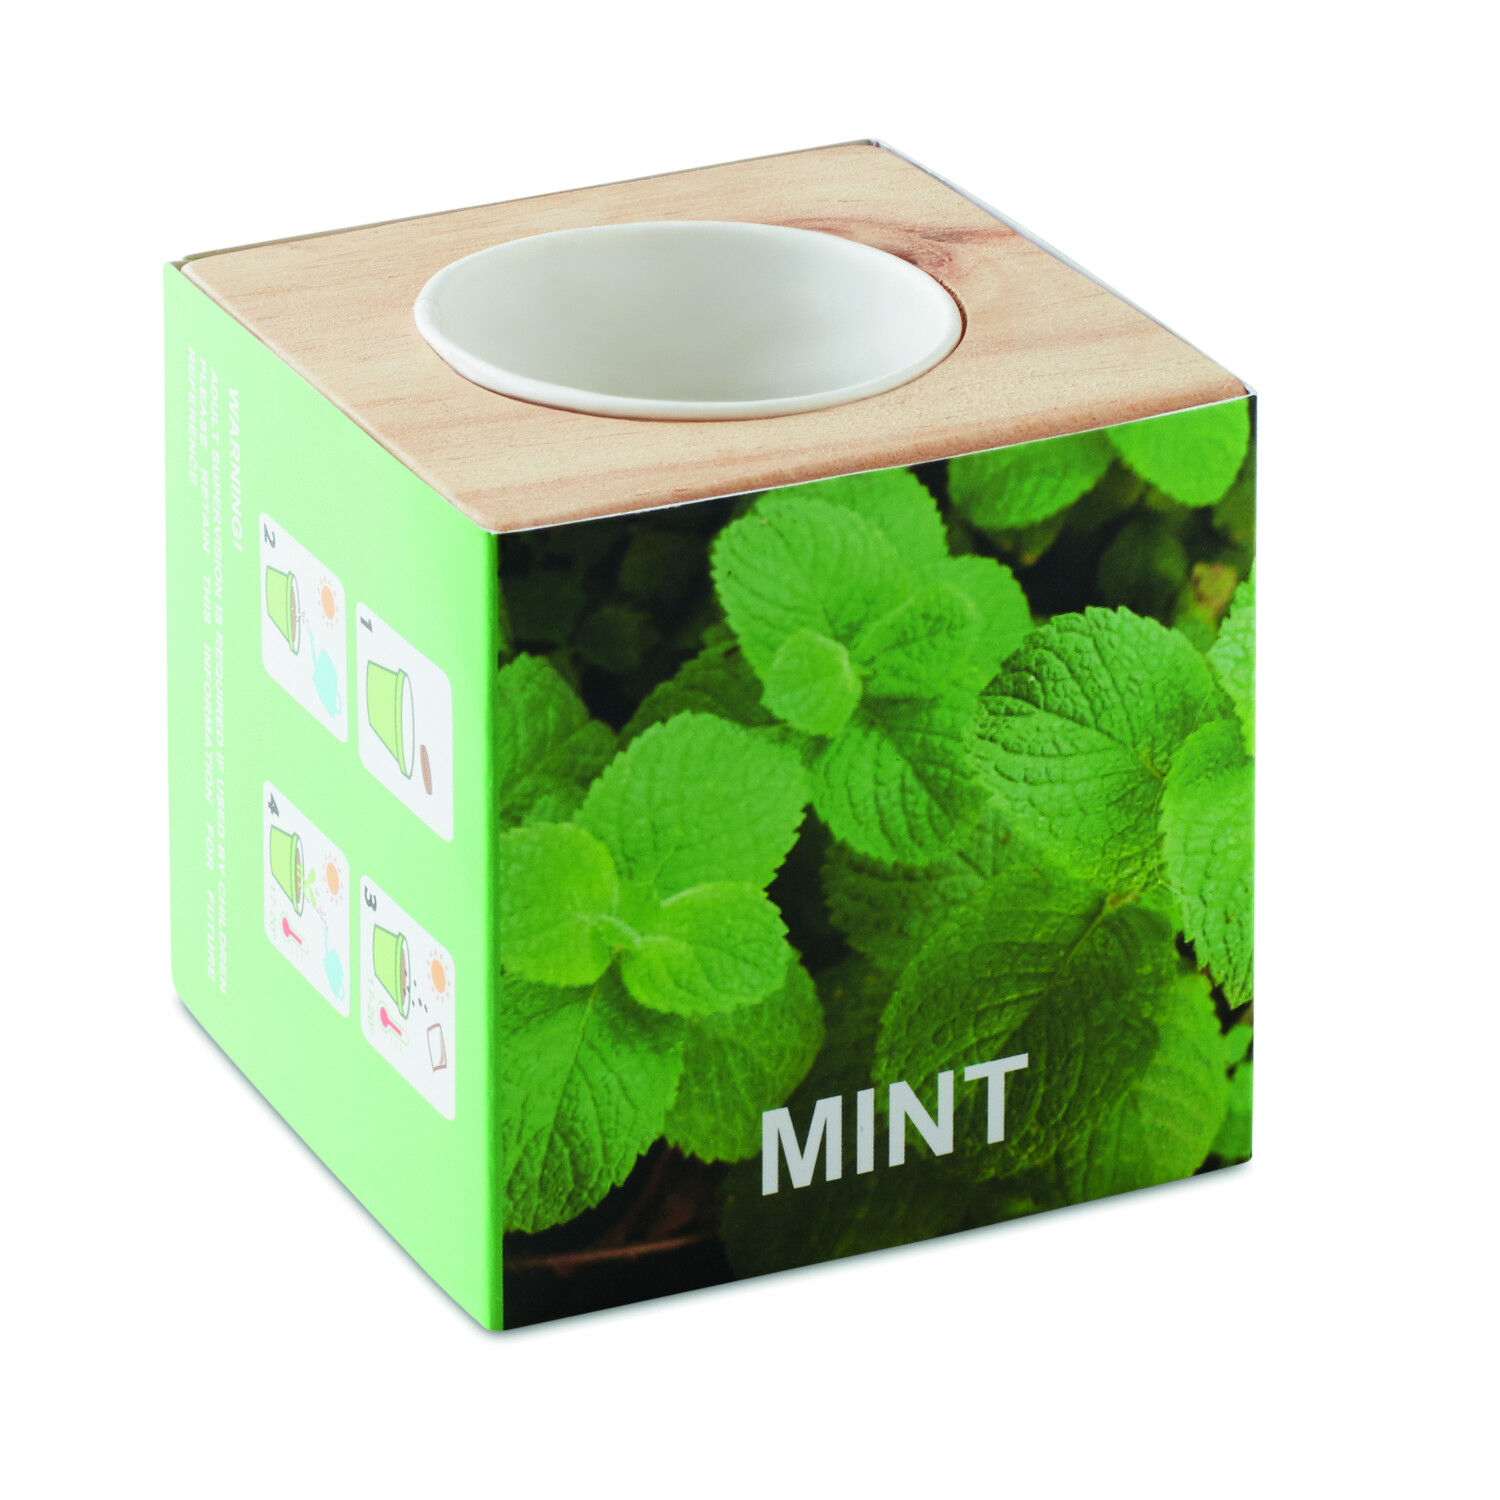 Mint Herb Growing Kit With Wooden Pot